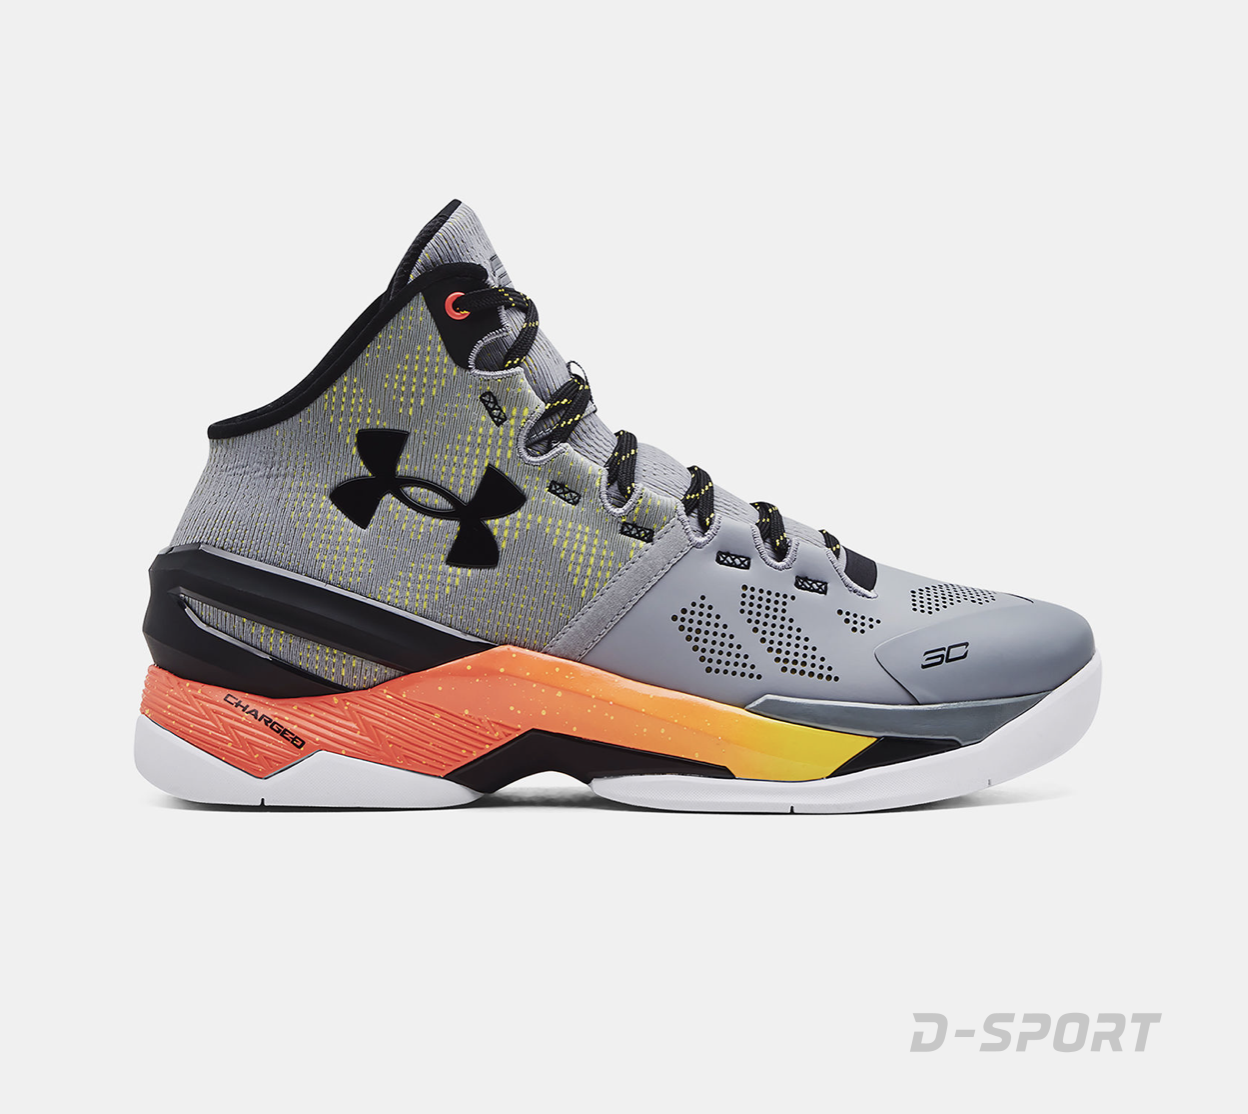 CURRY 2